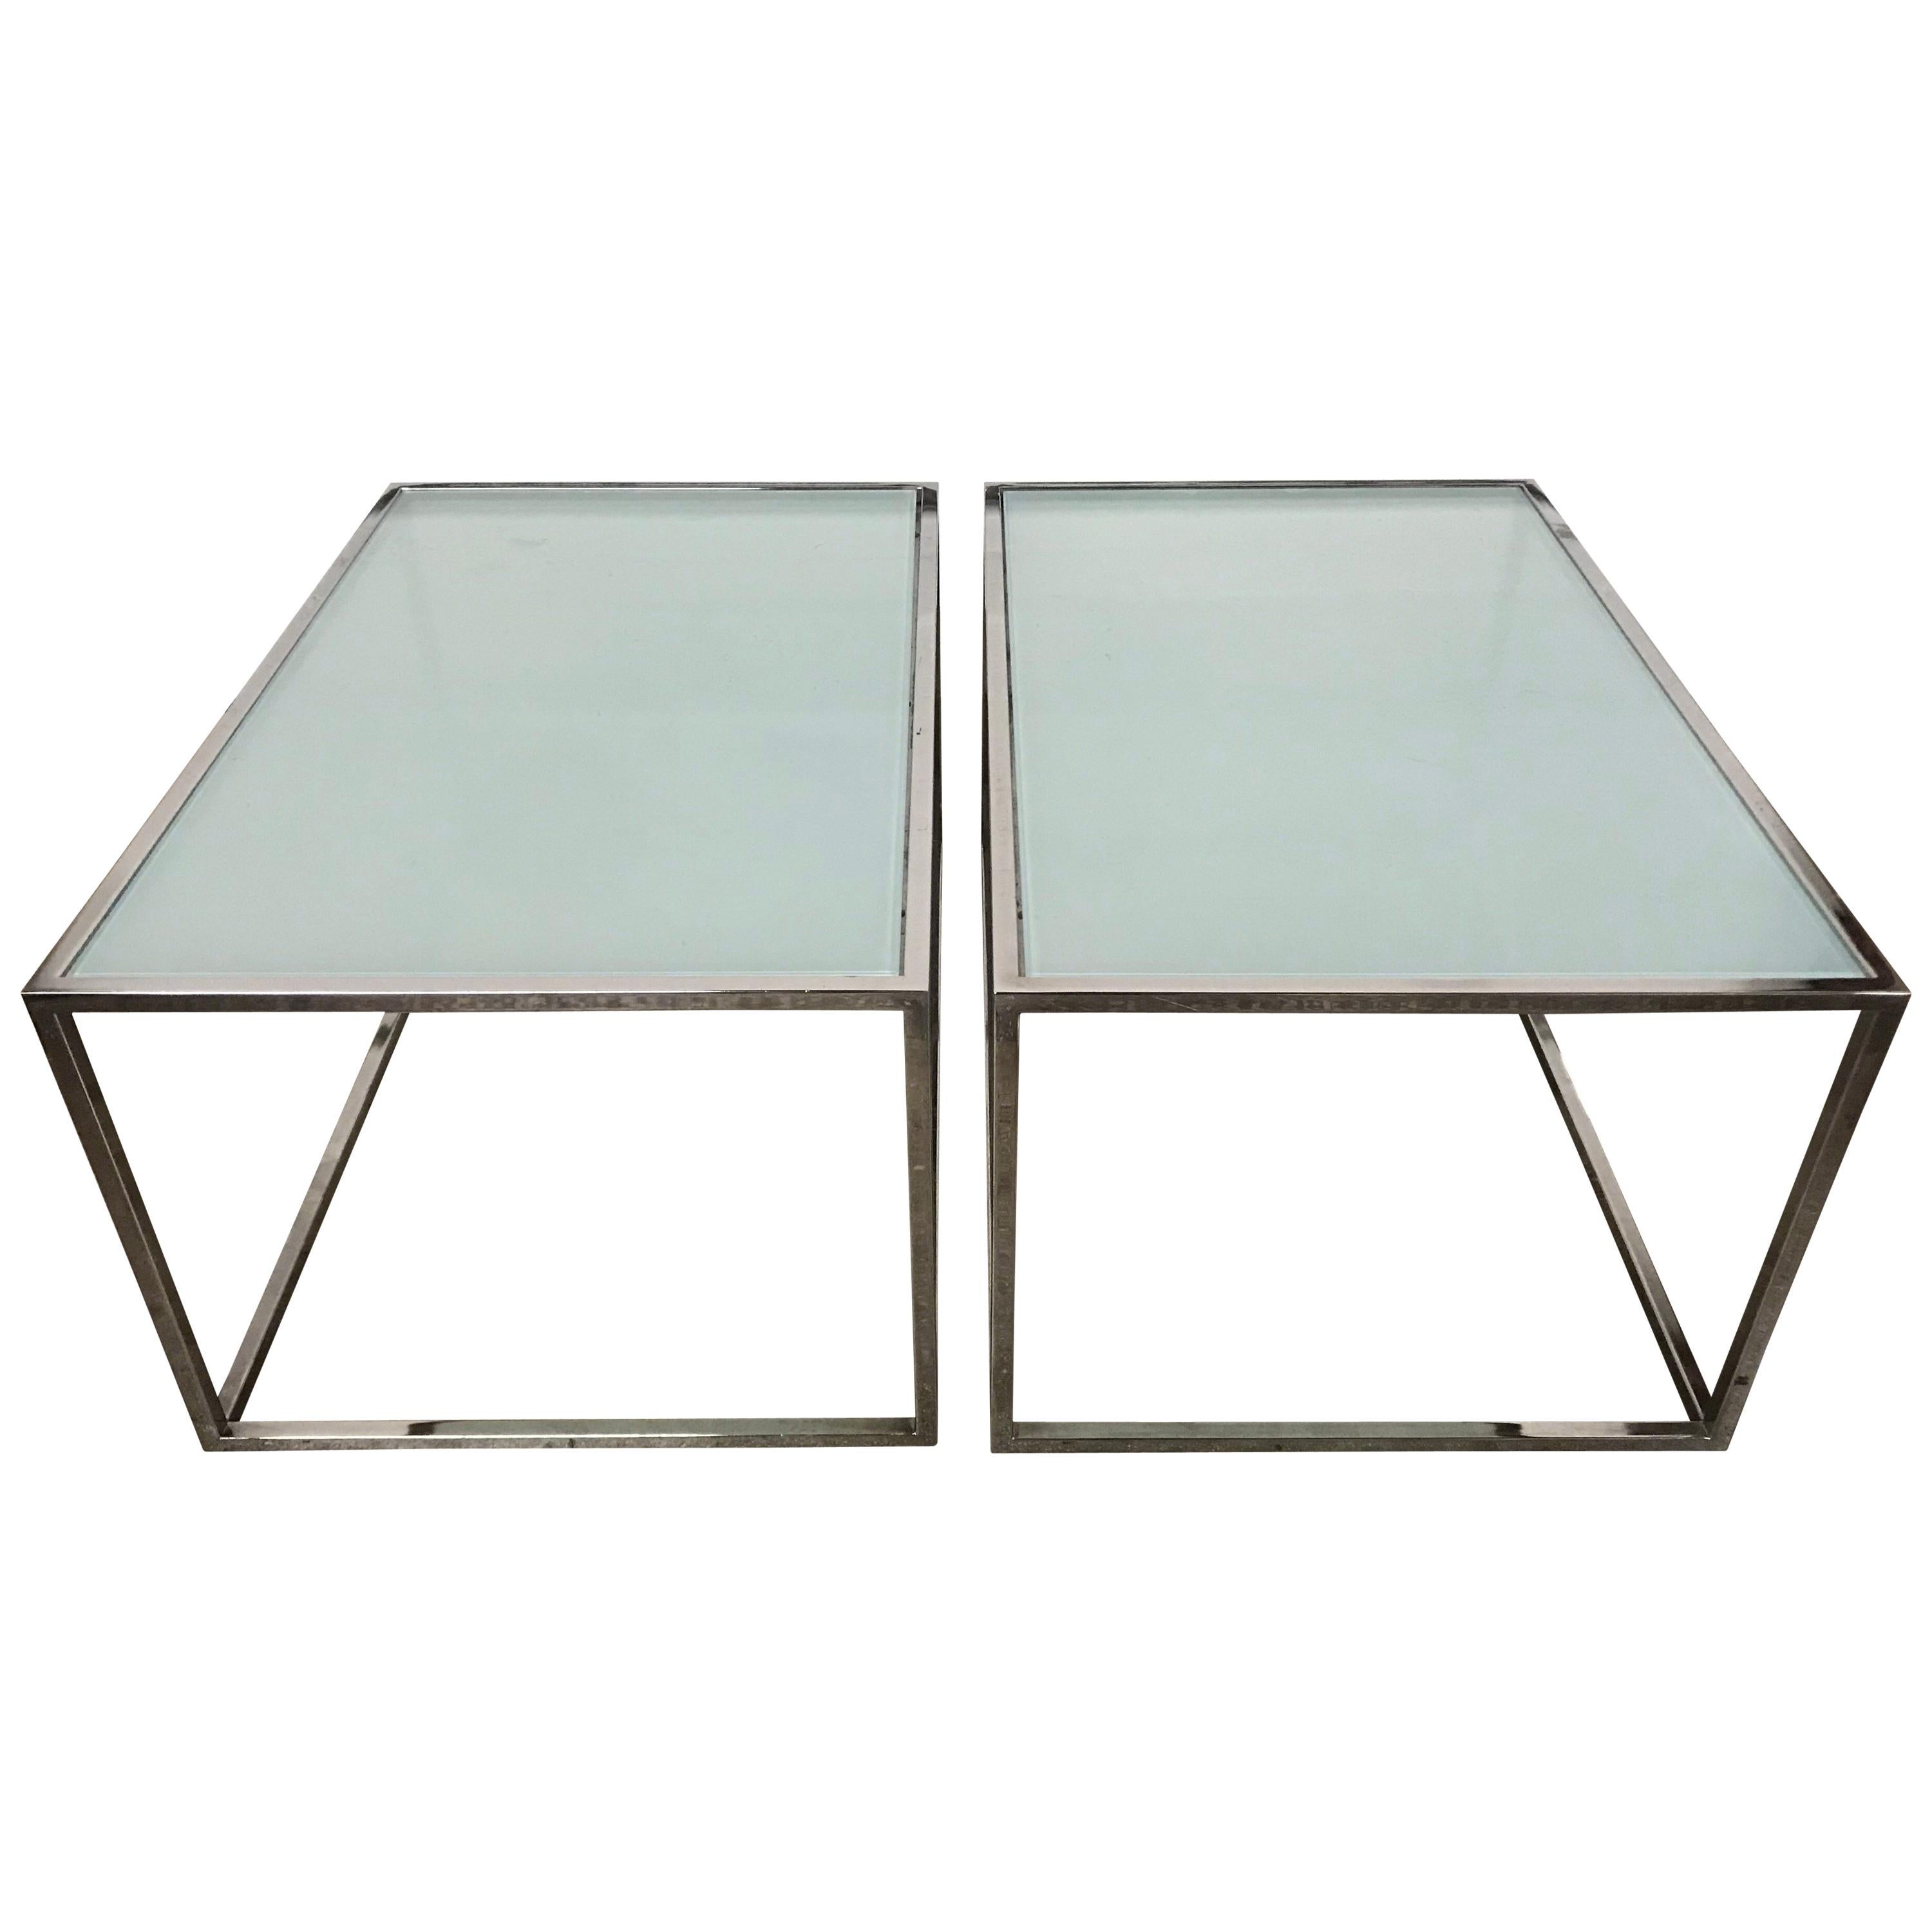 Pair Chrome and Frosted Glass Tables in the Style of Milo Baughman, circa 1970s. For Sale